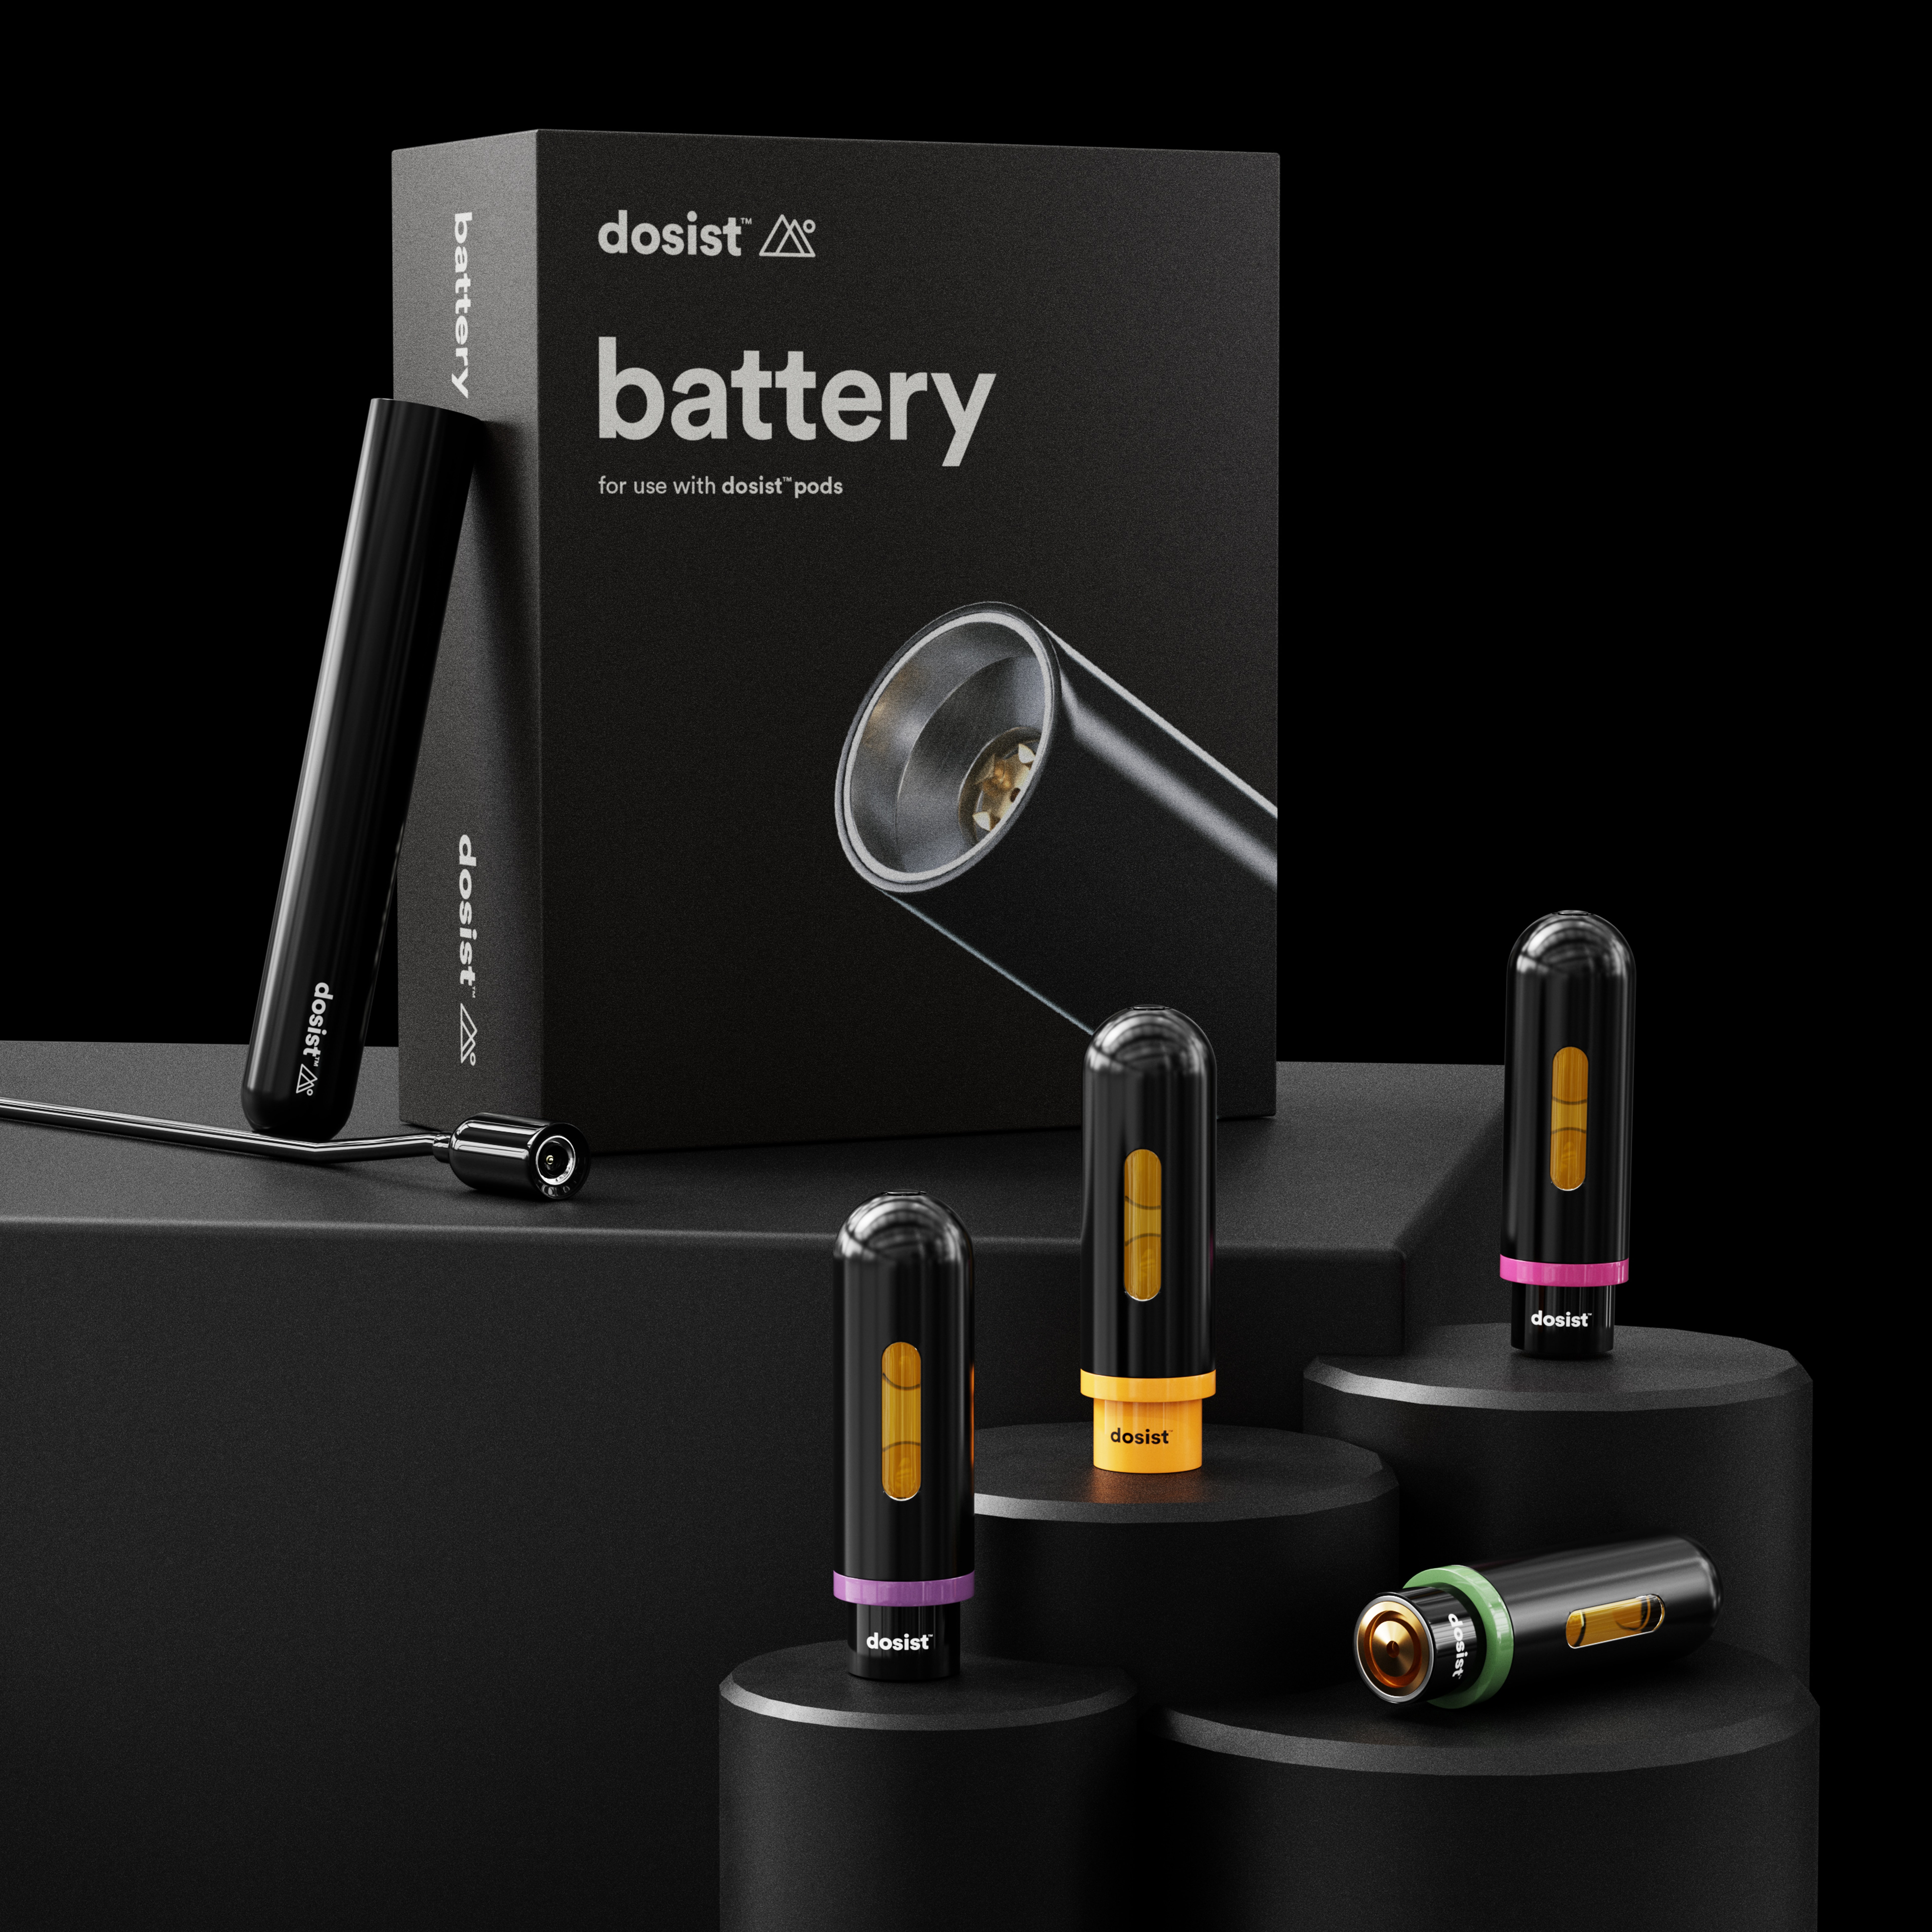 dosist Launches Battery For Use With Dosist Pods, And The Plus W/ LRTE Collection